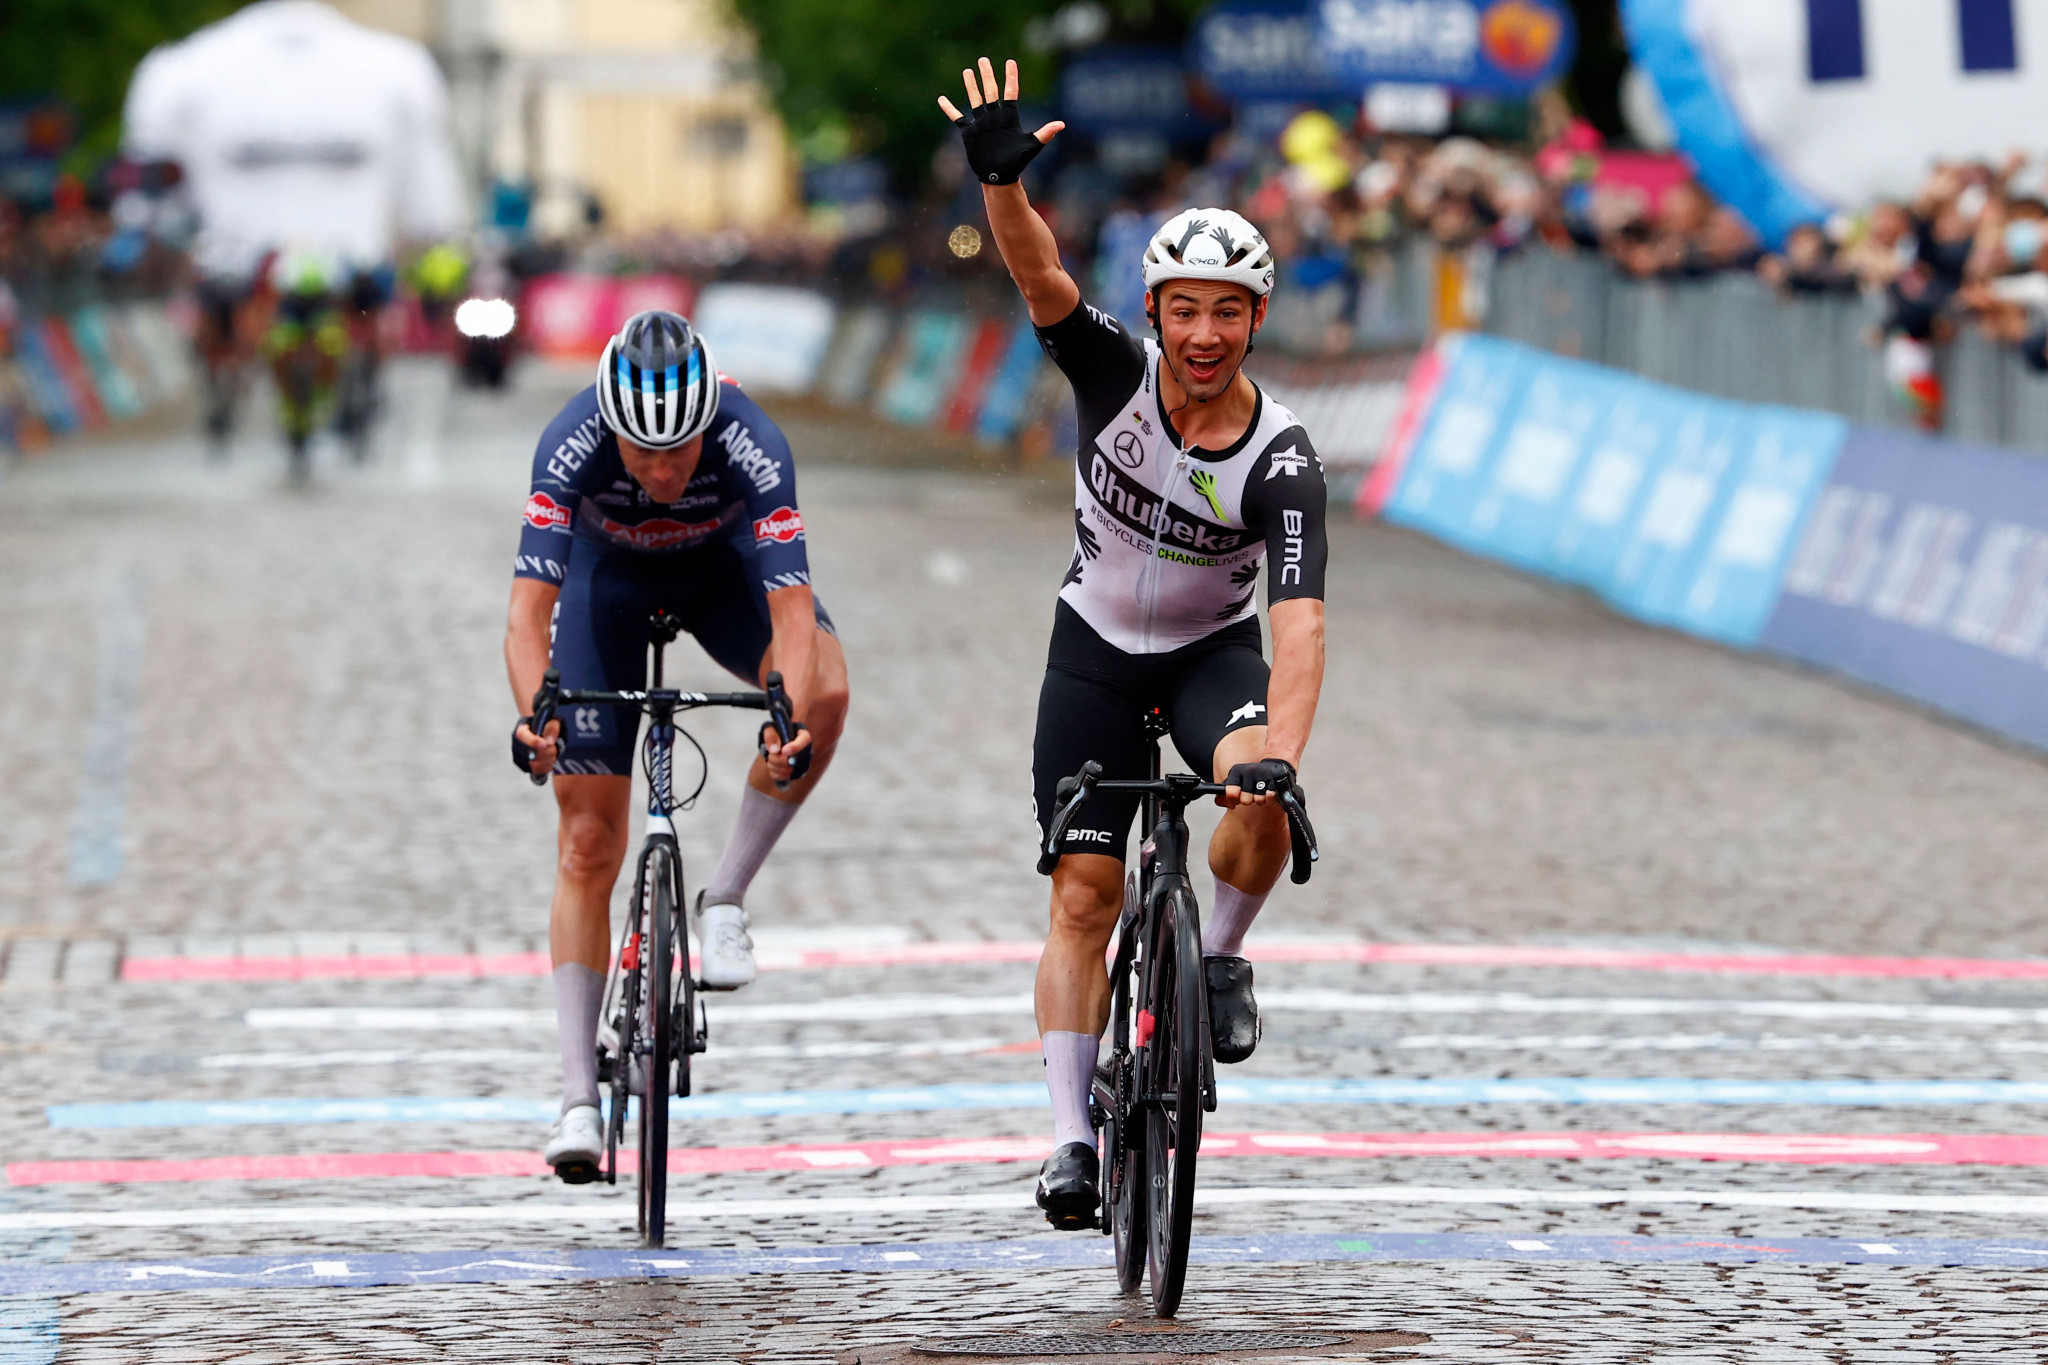 Campenaerts wins stage 15 from breakaway at Giro d'Italia